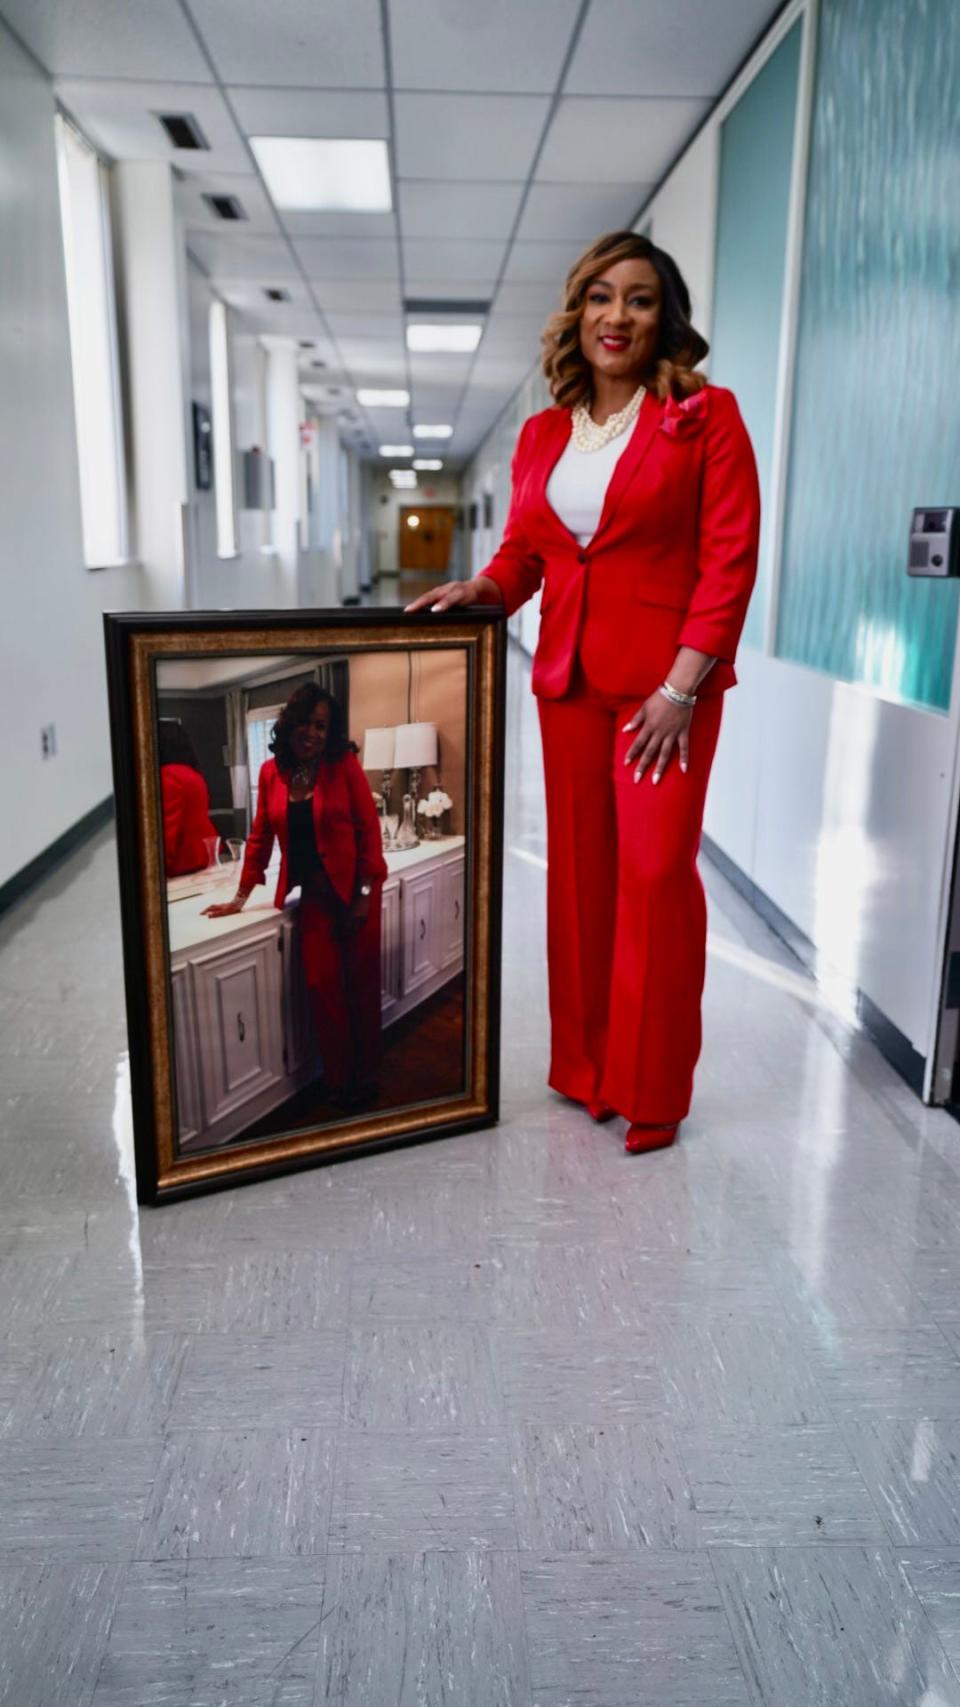 Interim superintendent Toni Williams, with a large photo of her mother. Williams is wearing the same suit that her mother was wearing in the picture.